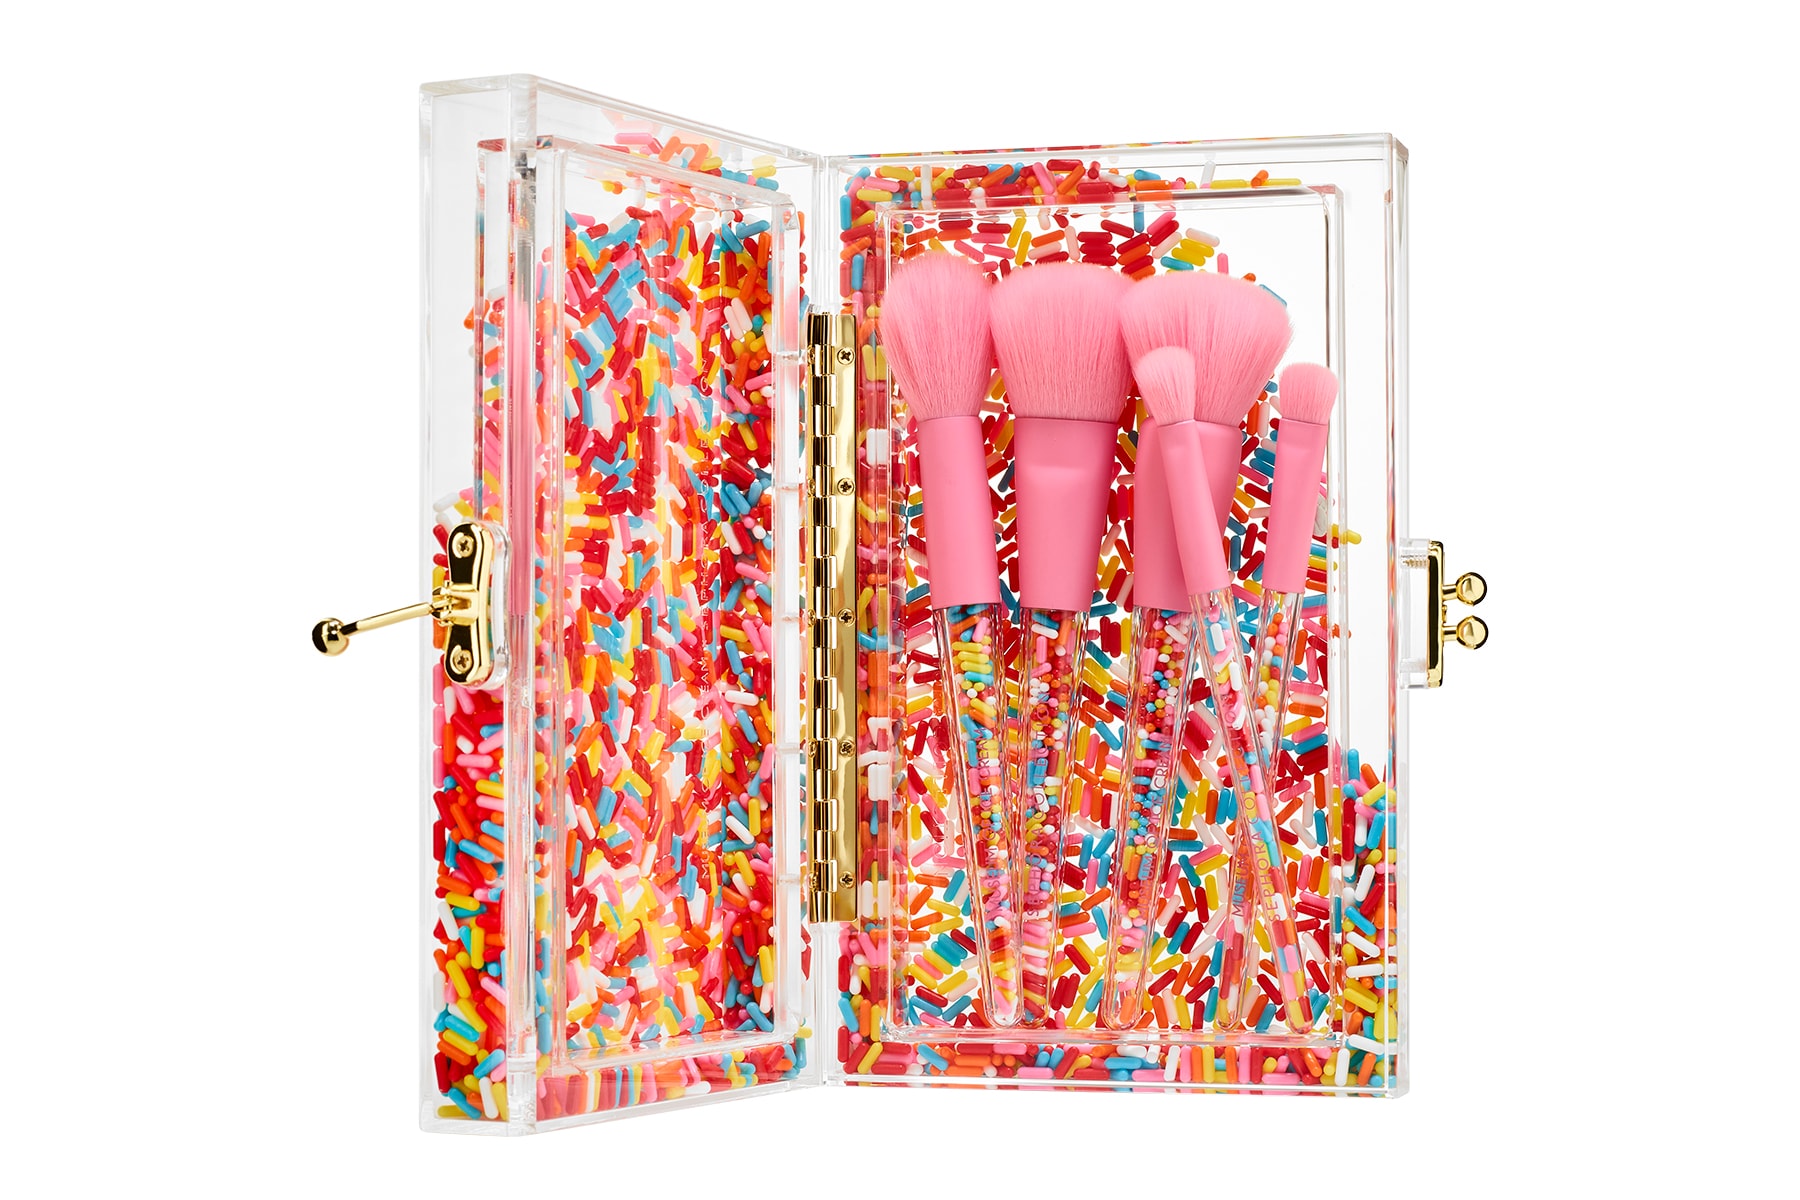 Museum of Ice Cream Sephora Makeup Collaboration Beauty Brushes Clutch Pink Sprinkle